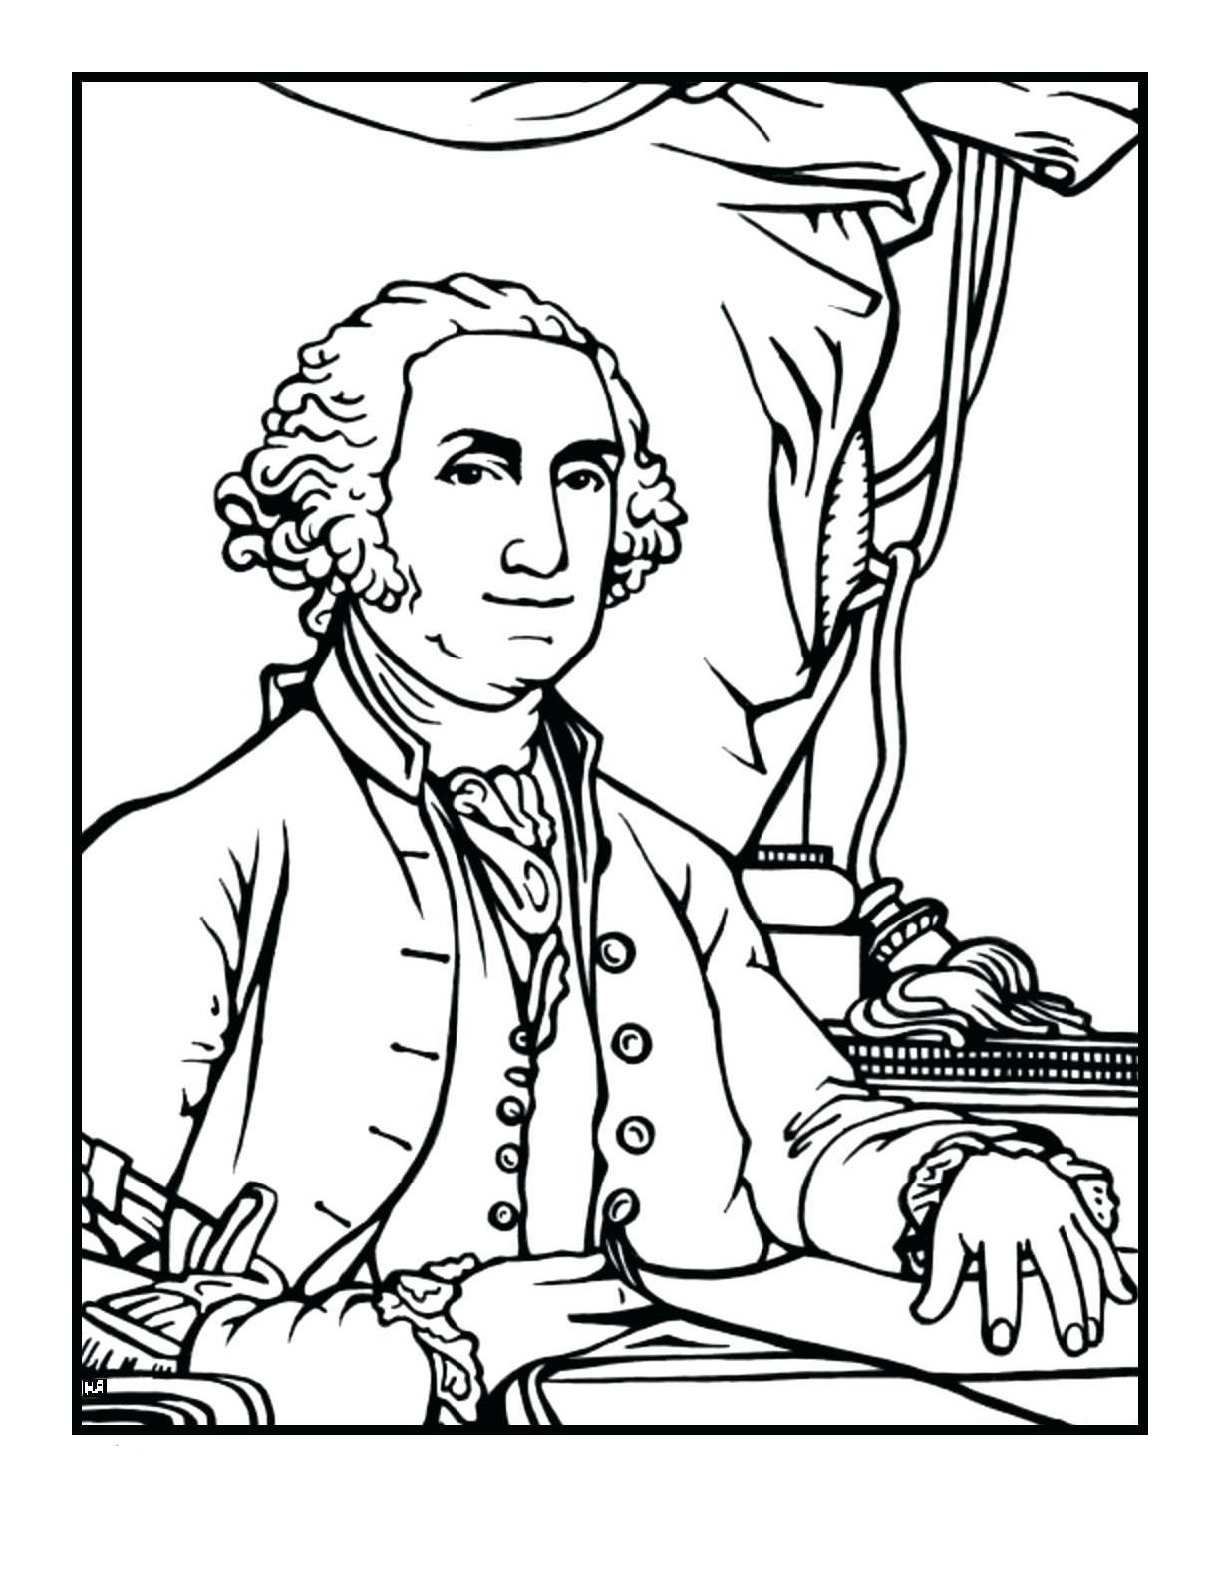 Coloring Pages For 5th Graders Social Studies